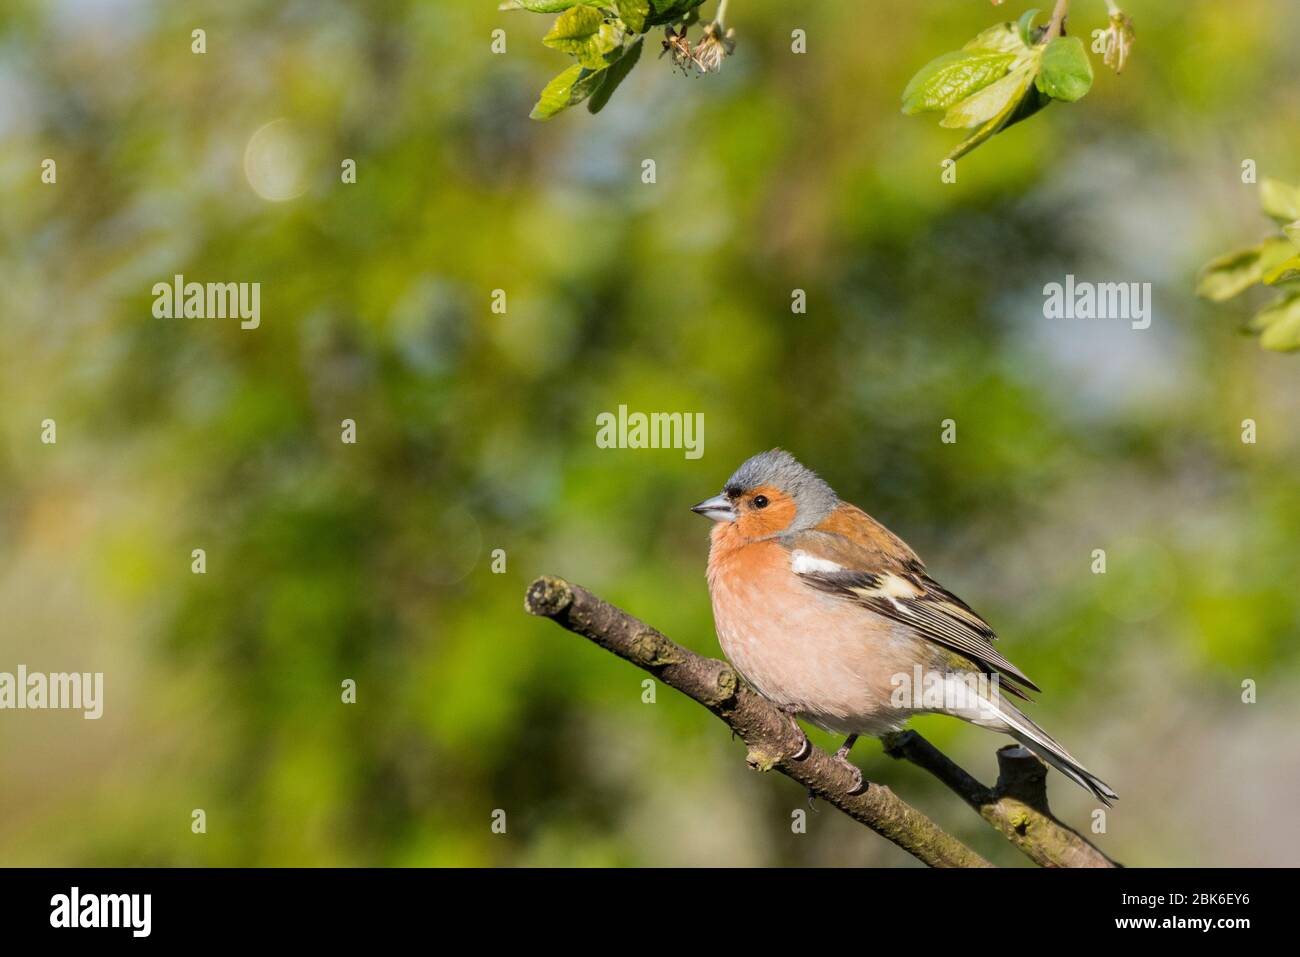 A Male Chaffinch (Fringilla coelebs) in the uk Stock Photo